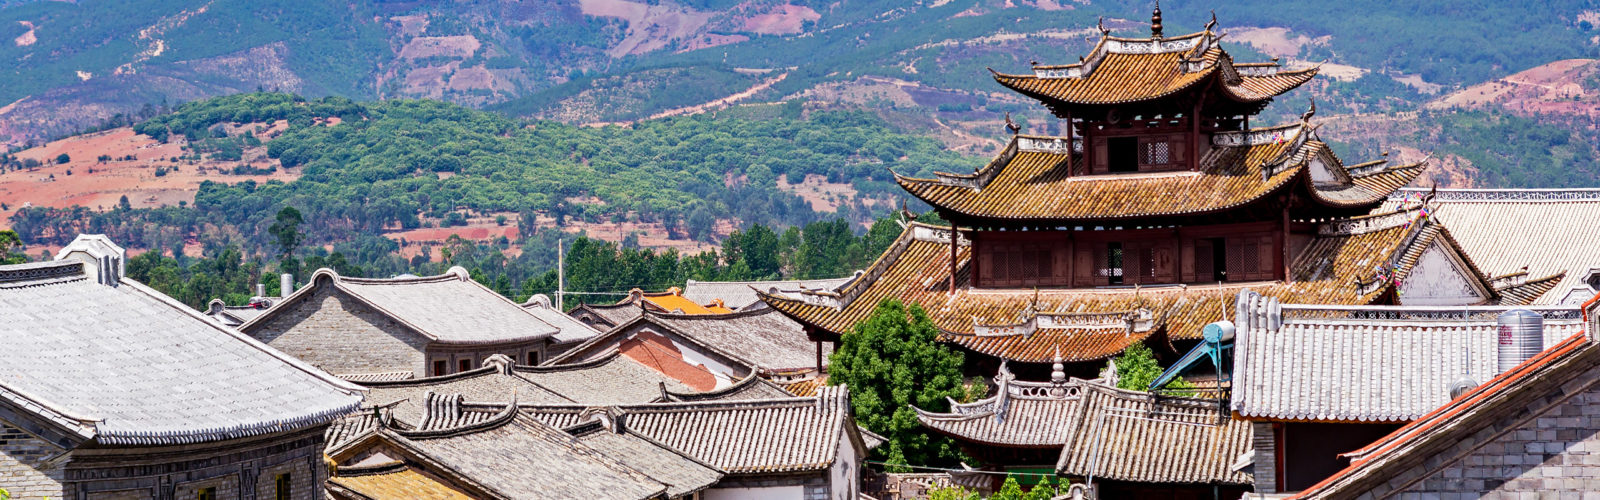 traditional-chinese-tiled-roofs-dali-china